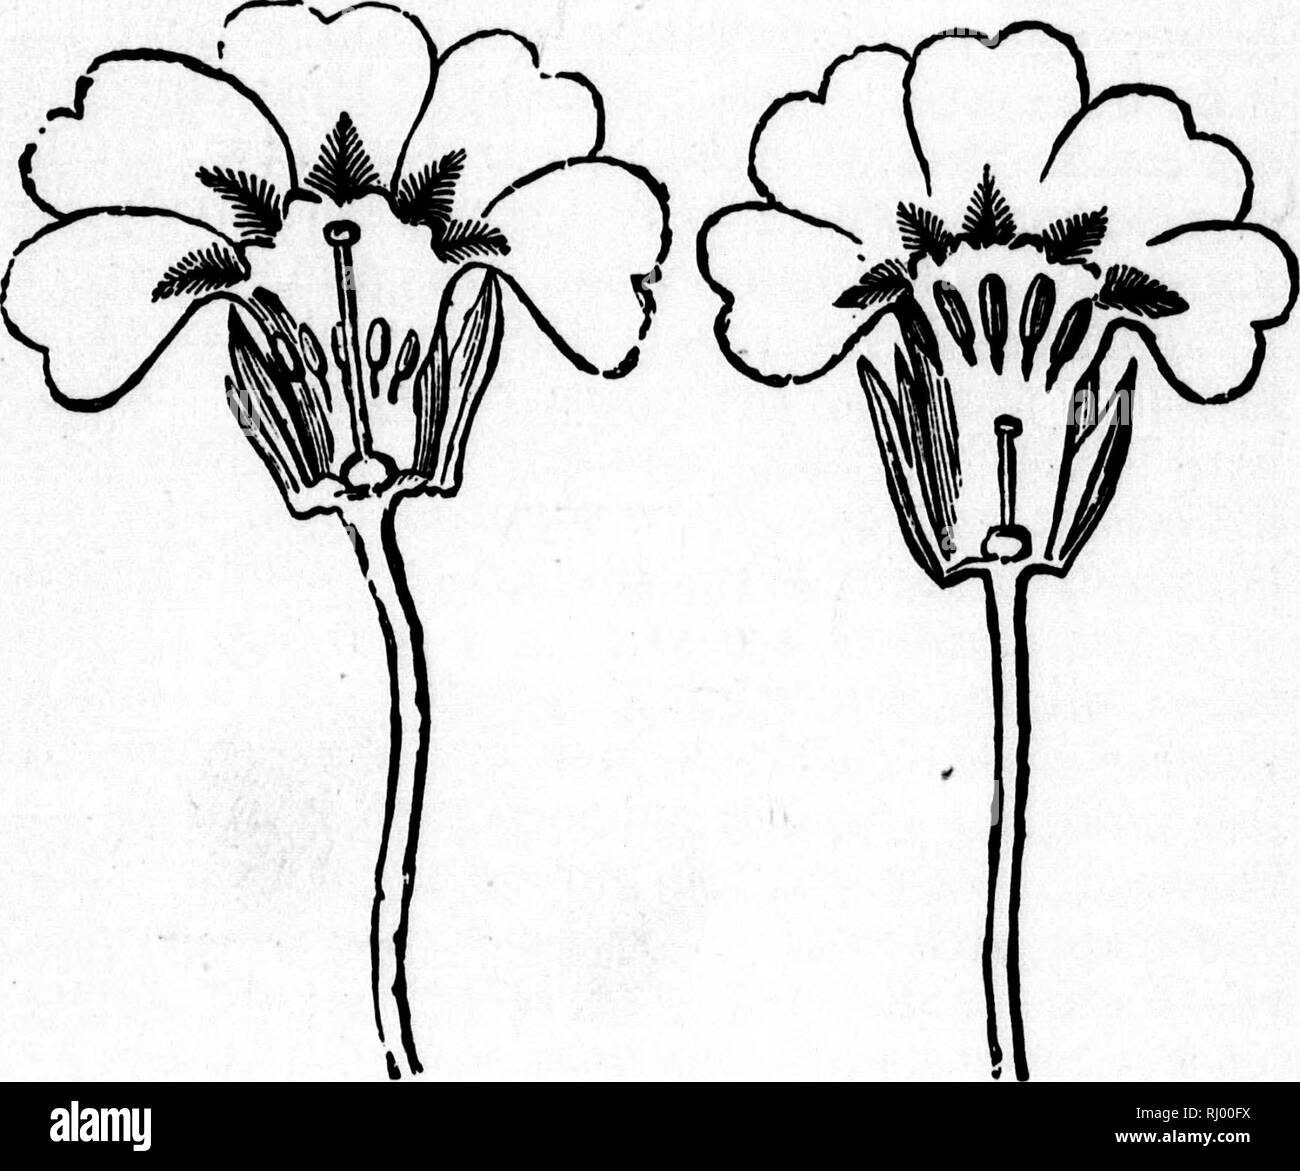 . The story of the plants [microform]. Plants; Botany; Plantes; Botanique. VARIOUS MARRIAGK CUSTOMS. 107 his way at once to the stamens and stigma or sensitive surface. The consequence is that the majority of the higher plants have now corollas in a single piece; and most of these are also coloured red, blue, or purple. Still, even now many of them retain marks of the original five. FIG. 18.—PIN-ETED PRIMROSE, CUT OPEN SO AS TO SHOW THE ARRANGEMENT OF THE STAMENS AND STIGMA. PIG. 19.—THRUM-EYED PRIMROSE, GUT OPEN SO AS TO SHOW STA- MENS AND STIGMA. petals. For instance, the harebell has the ed Stock Photo